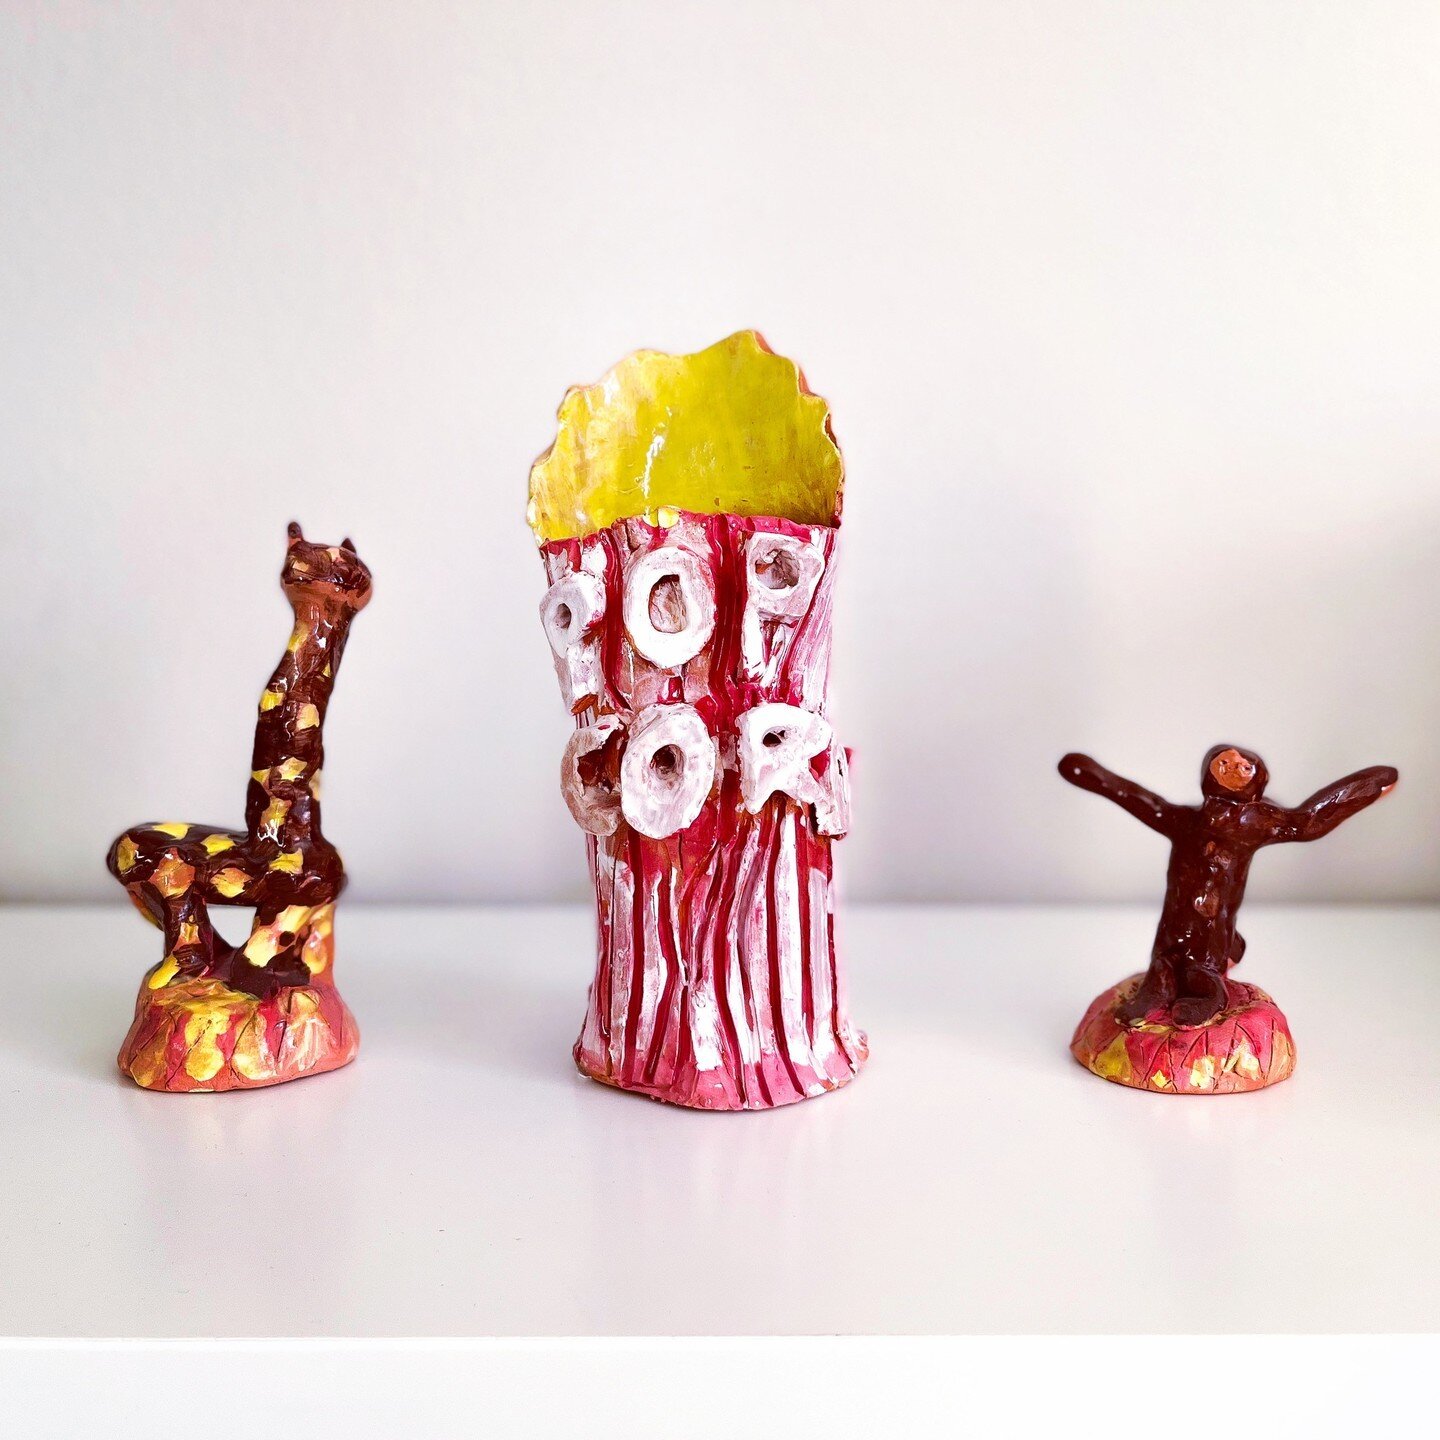 My Favorite Things, Entry #4⁠
⁠
This ceramic circus from my son's stint at a clay camp in Bozeman, Montana sits in my studio. He made these pieces when he was 7 or so (7 years ago!) and I love them. I also feel they fit my studio aesthetic, which is 